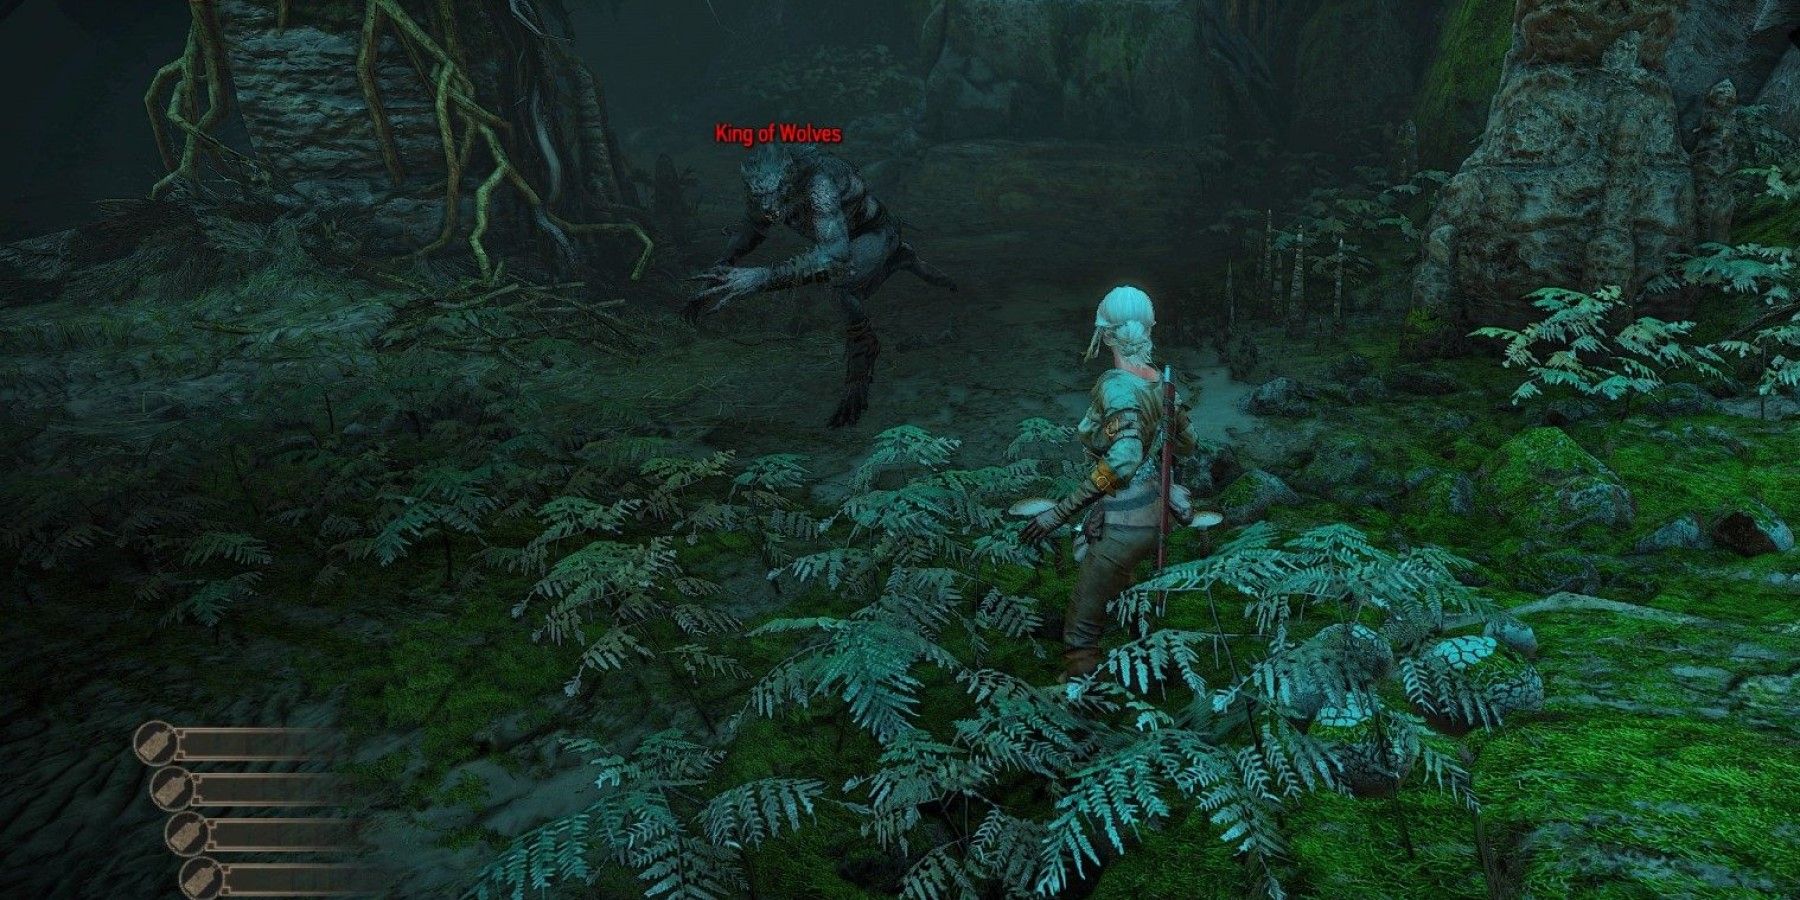 Witcher 3 Ciri Fighting the King of Wolves